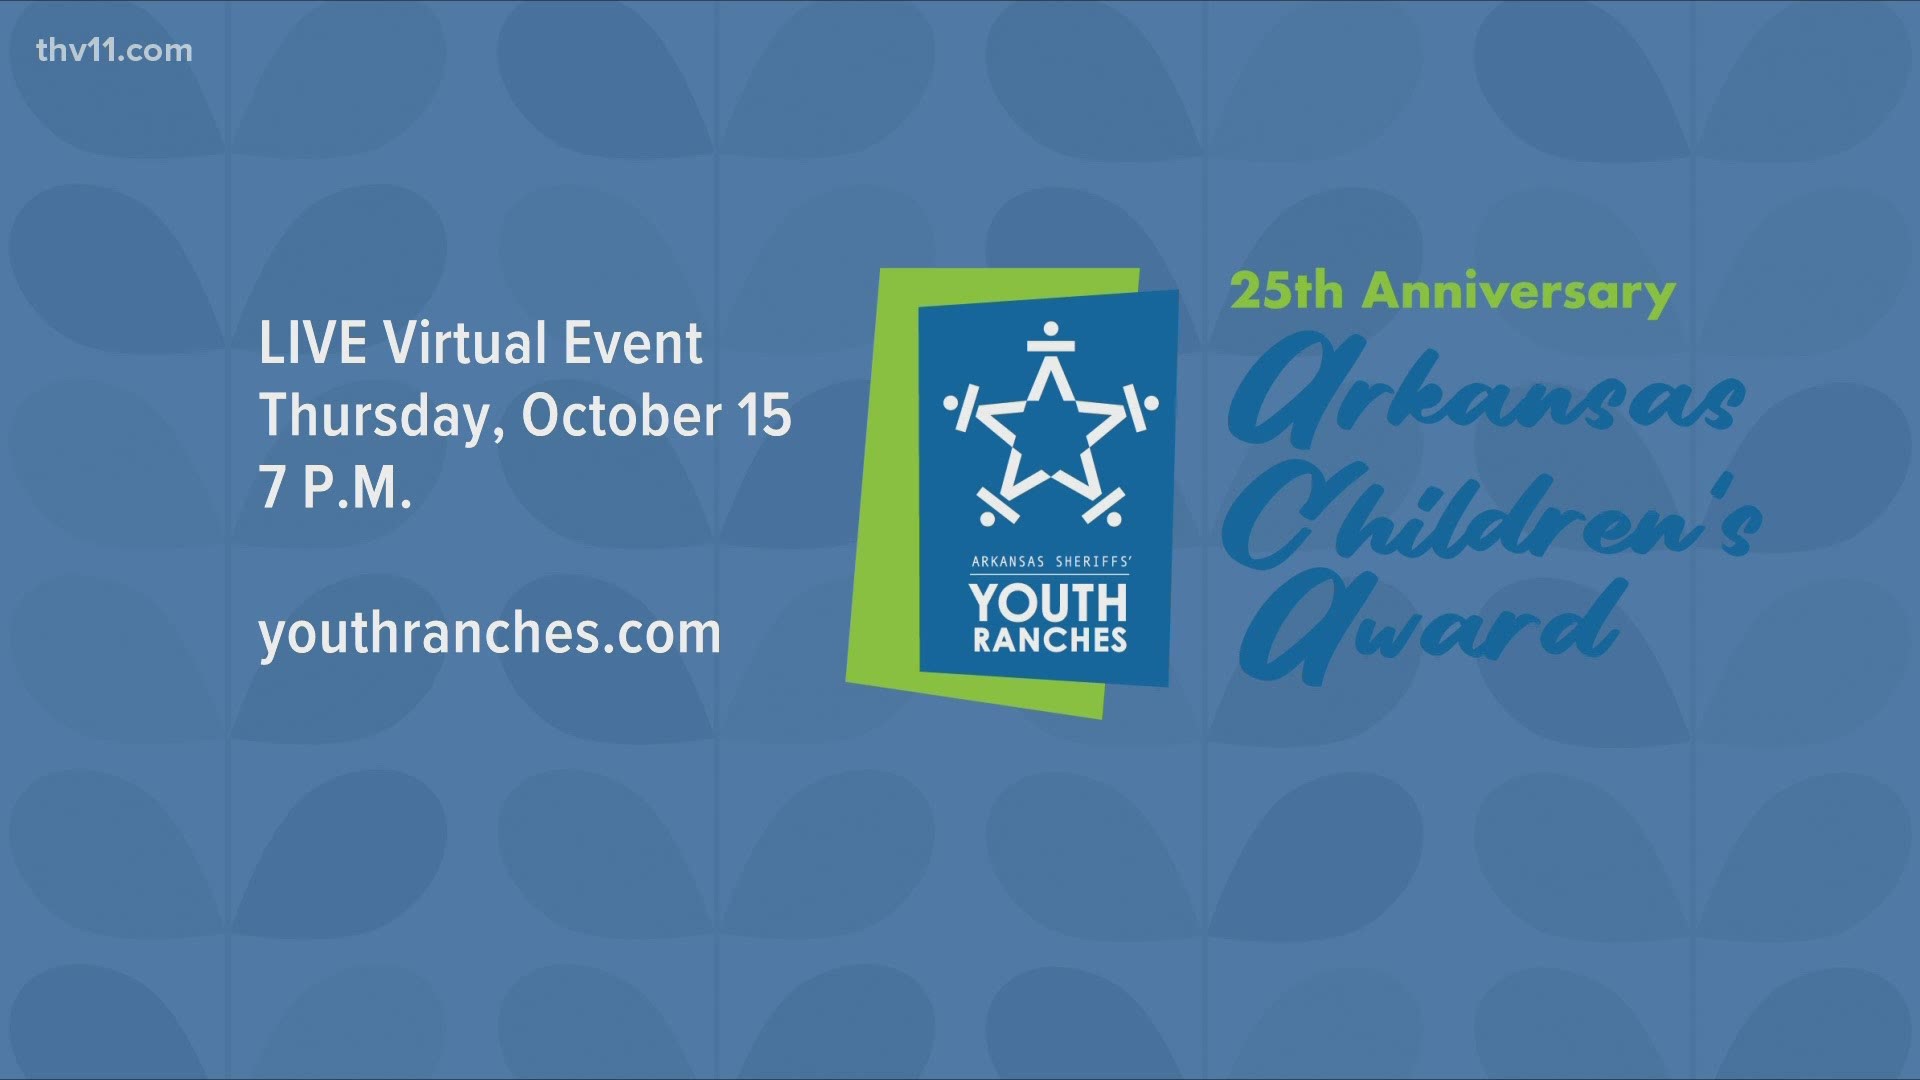 The Arkansas Sheriffs’ Youth Ranches 25th Anniversary Arkansas Children’s Award will be held virtually on Oct. 15 at 7 p.m. All past honorees will be recognized.